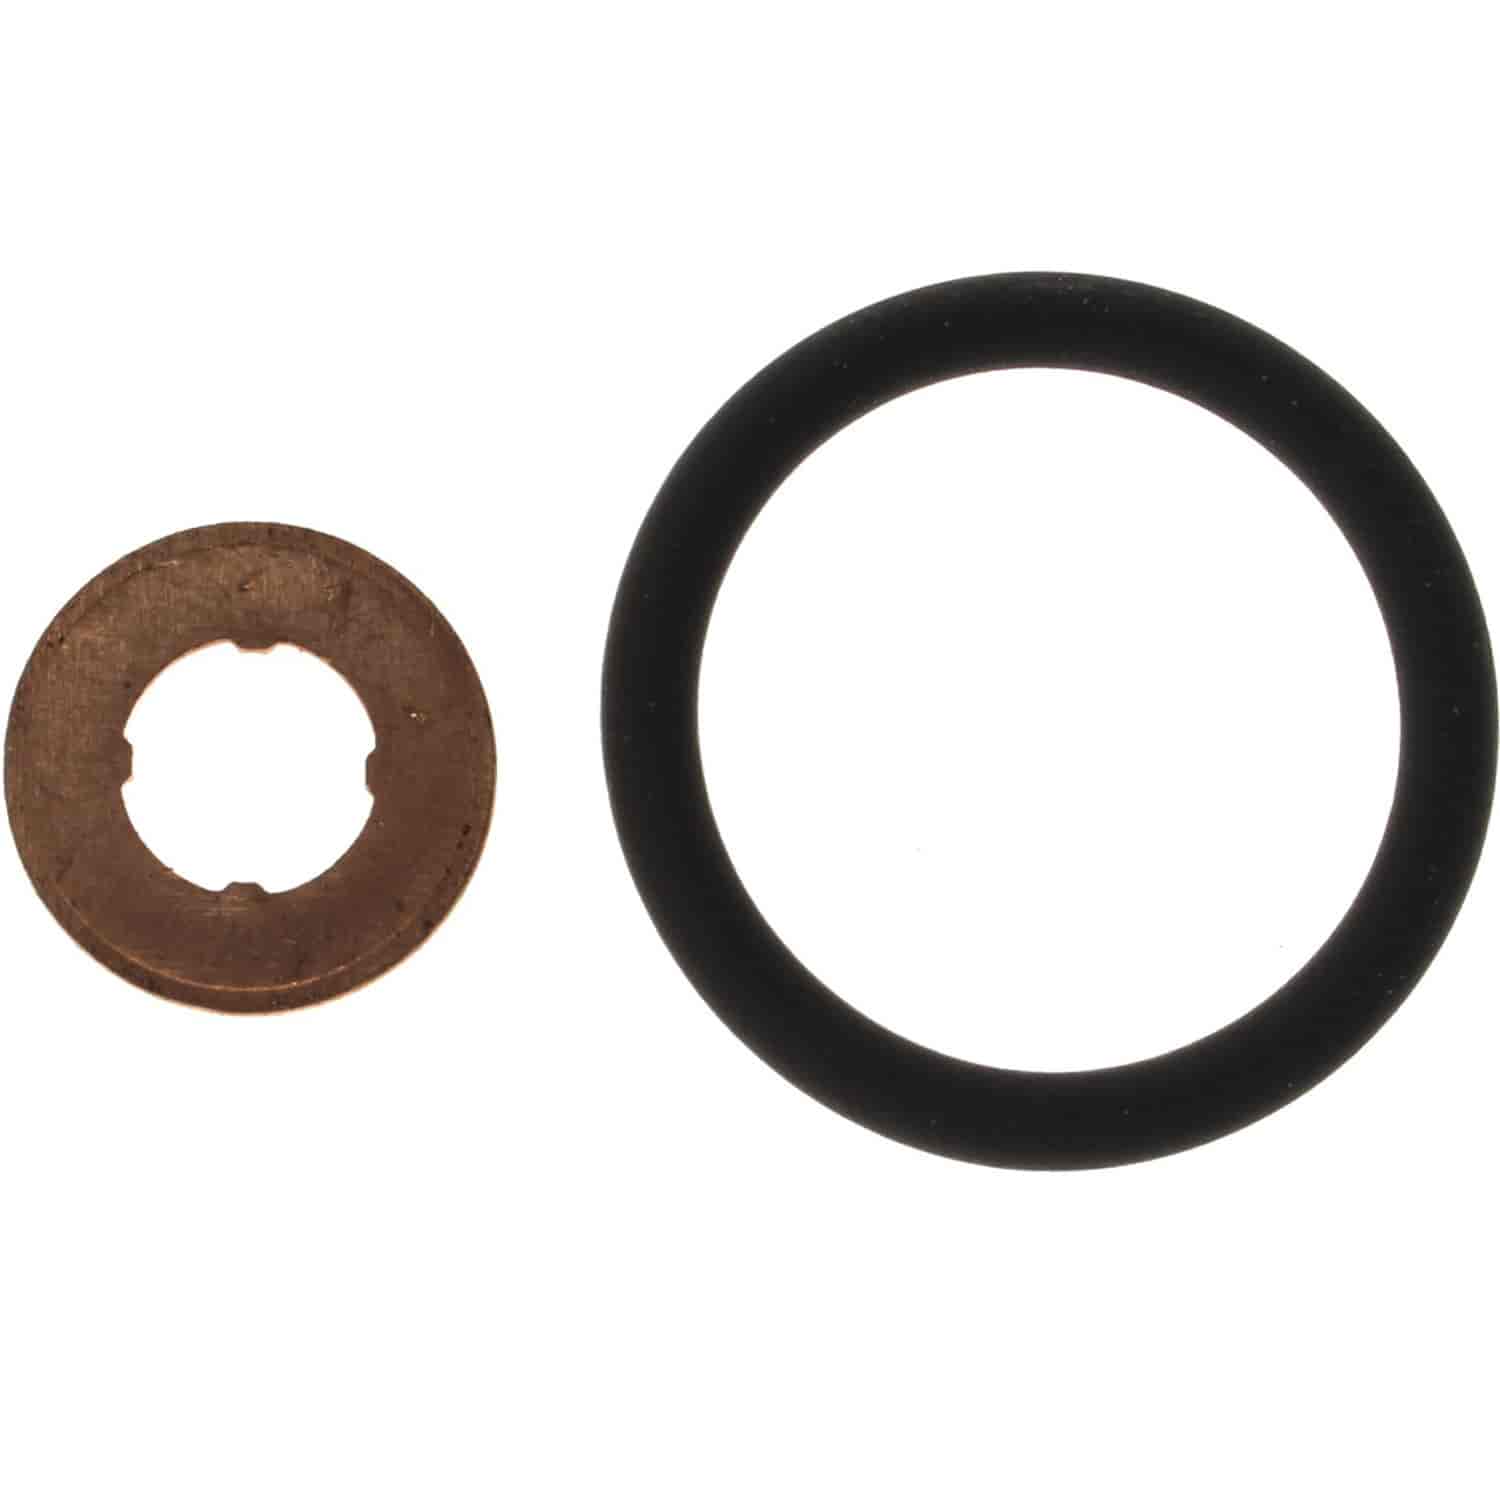 Fuel Injection O-Ring for Cummins 6.7L B Series Injector Set